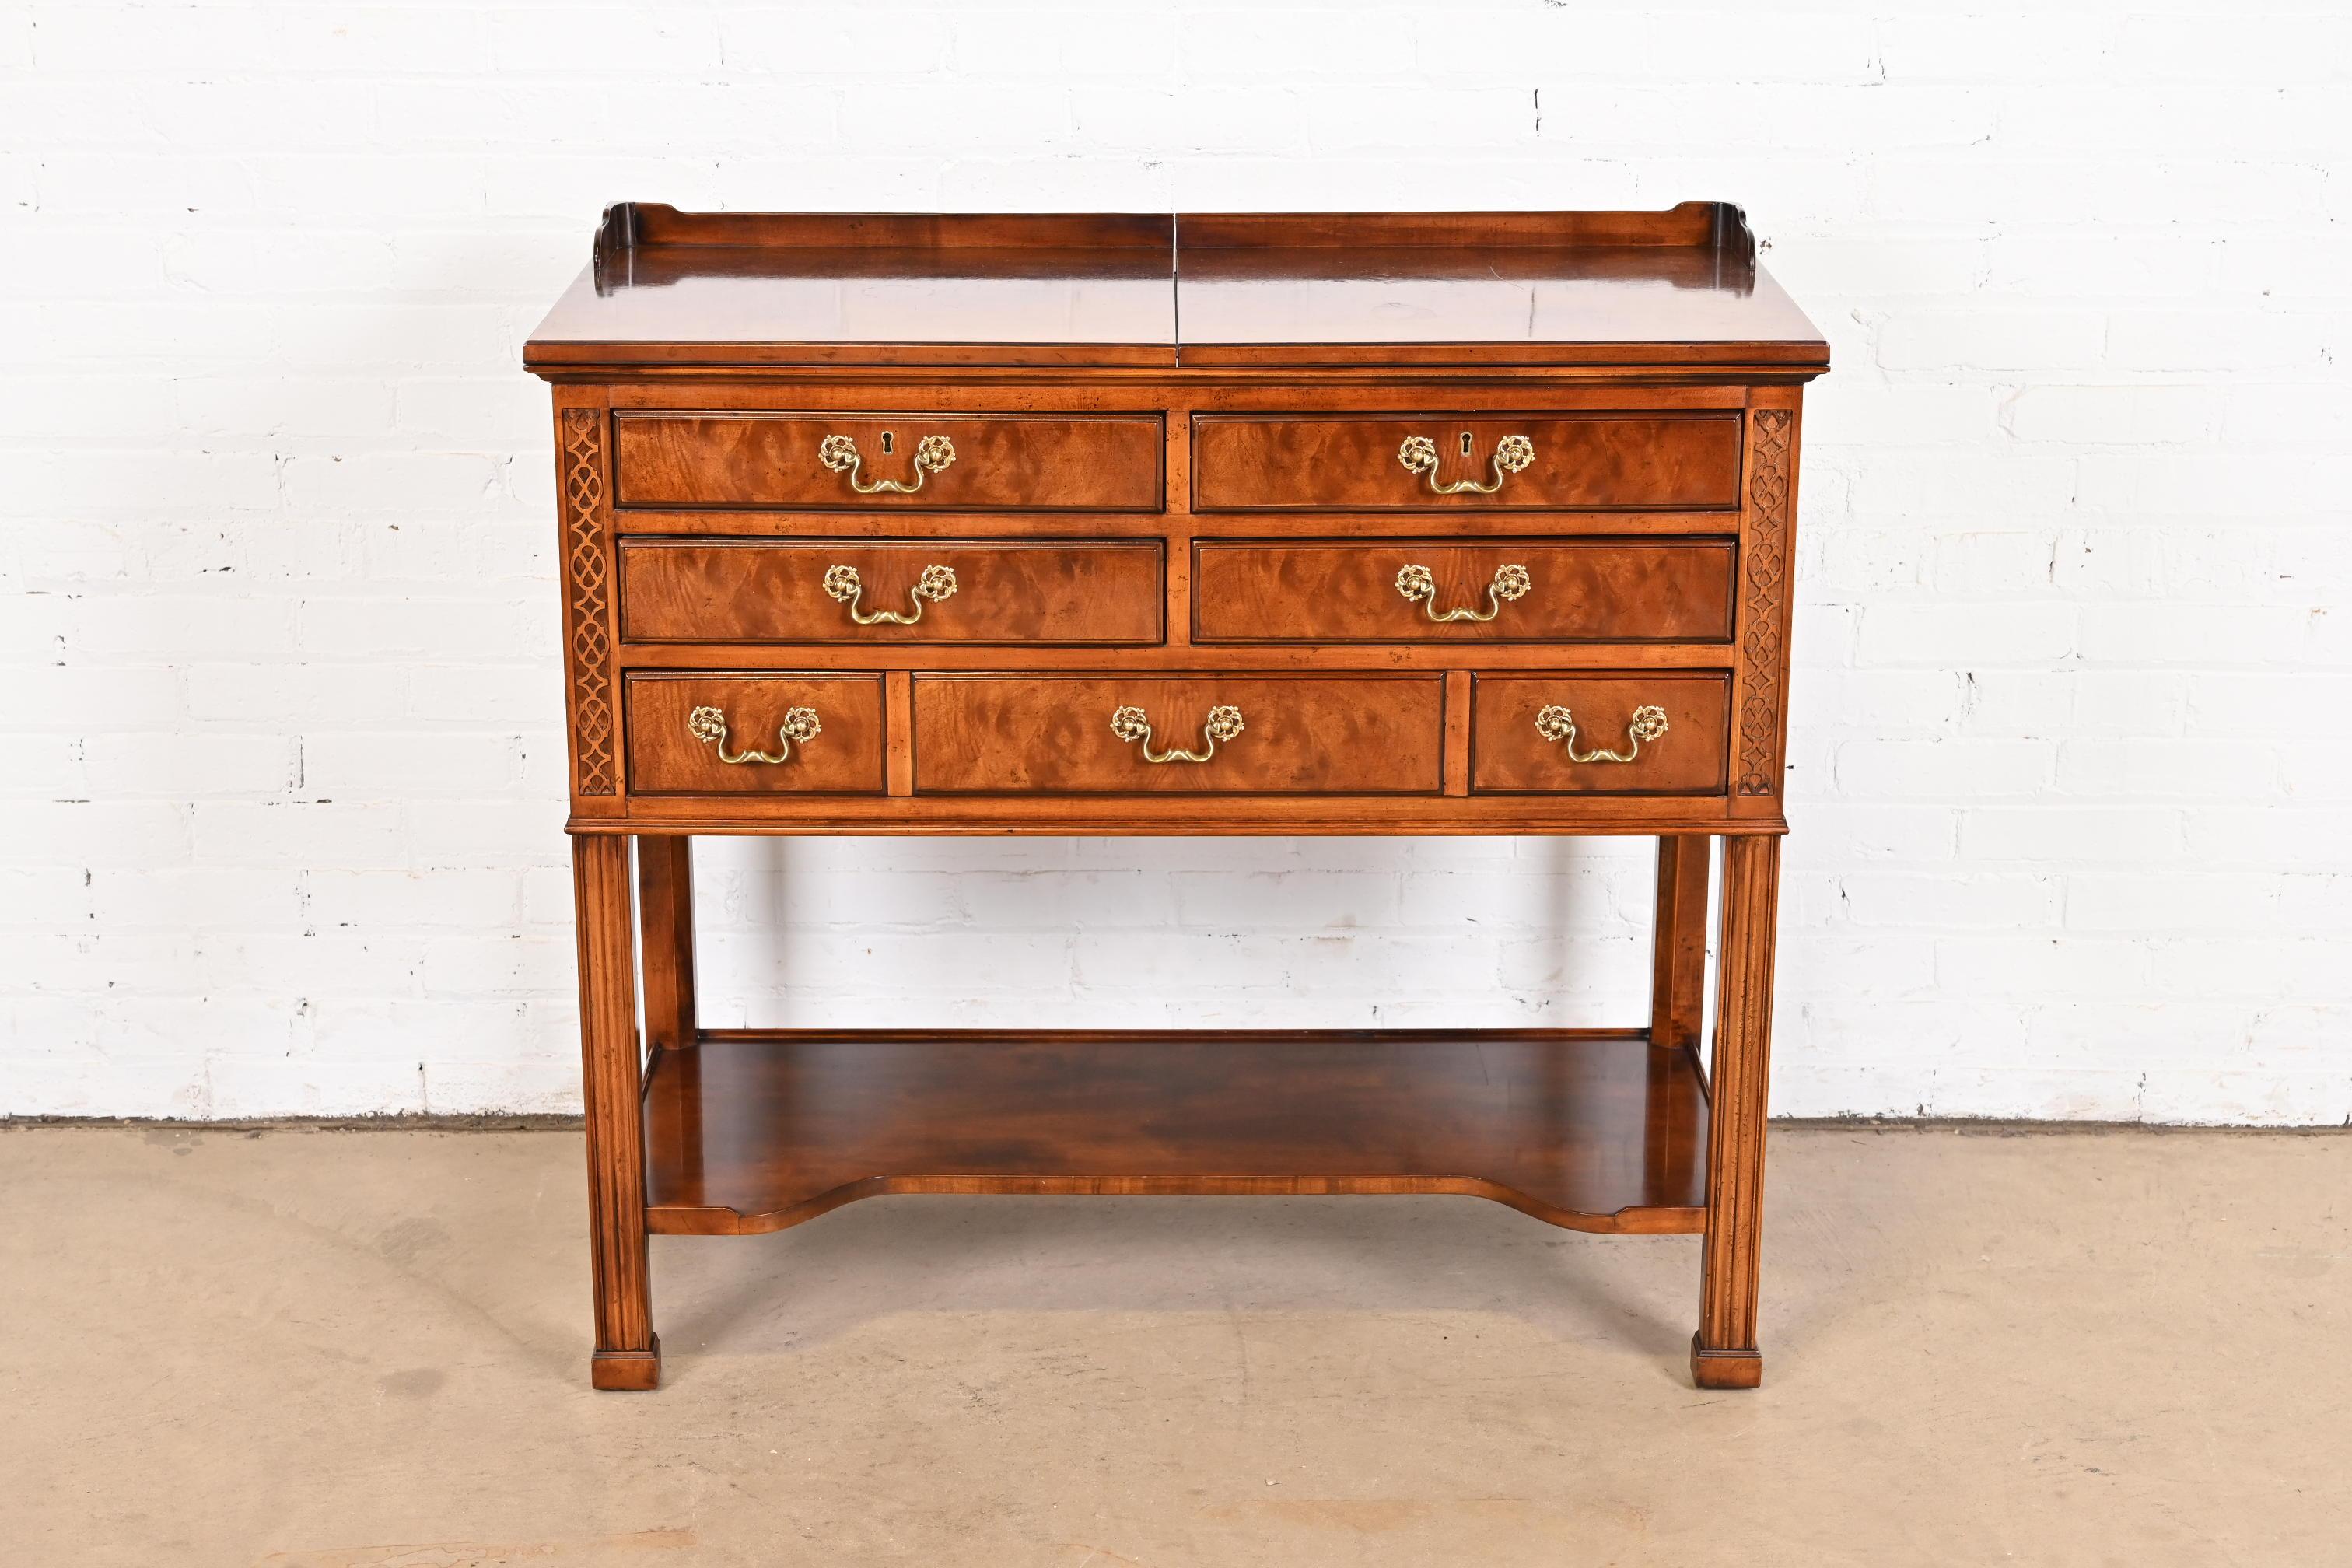 A gorgeous Georgian or Chippendale style flip top dry bar server

By Henredon, 